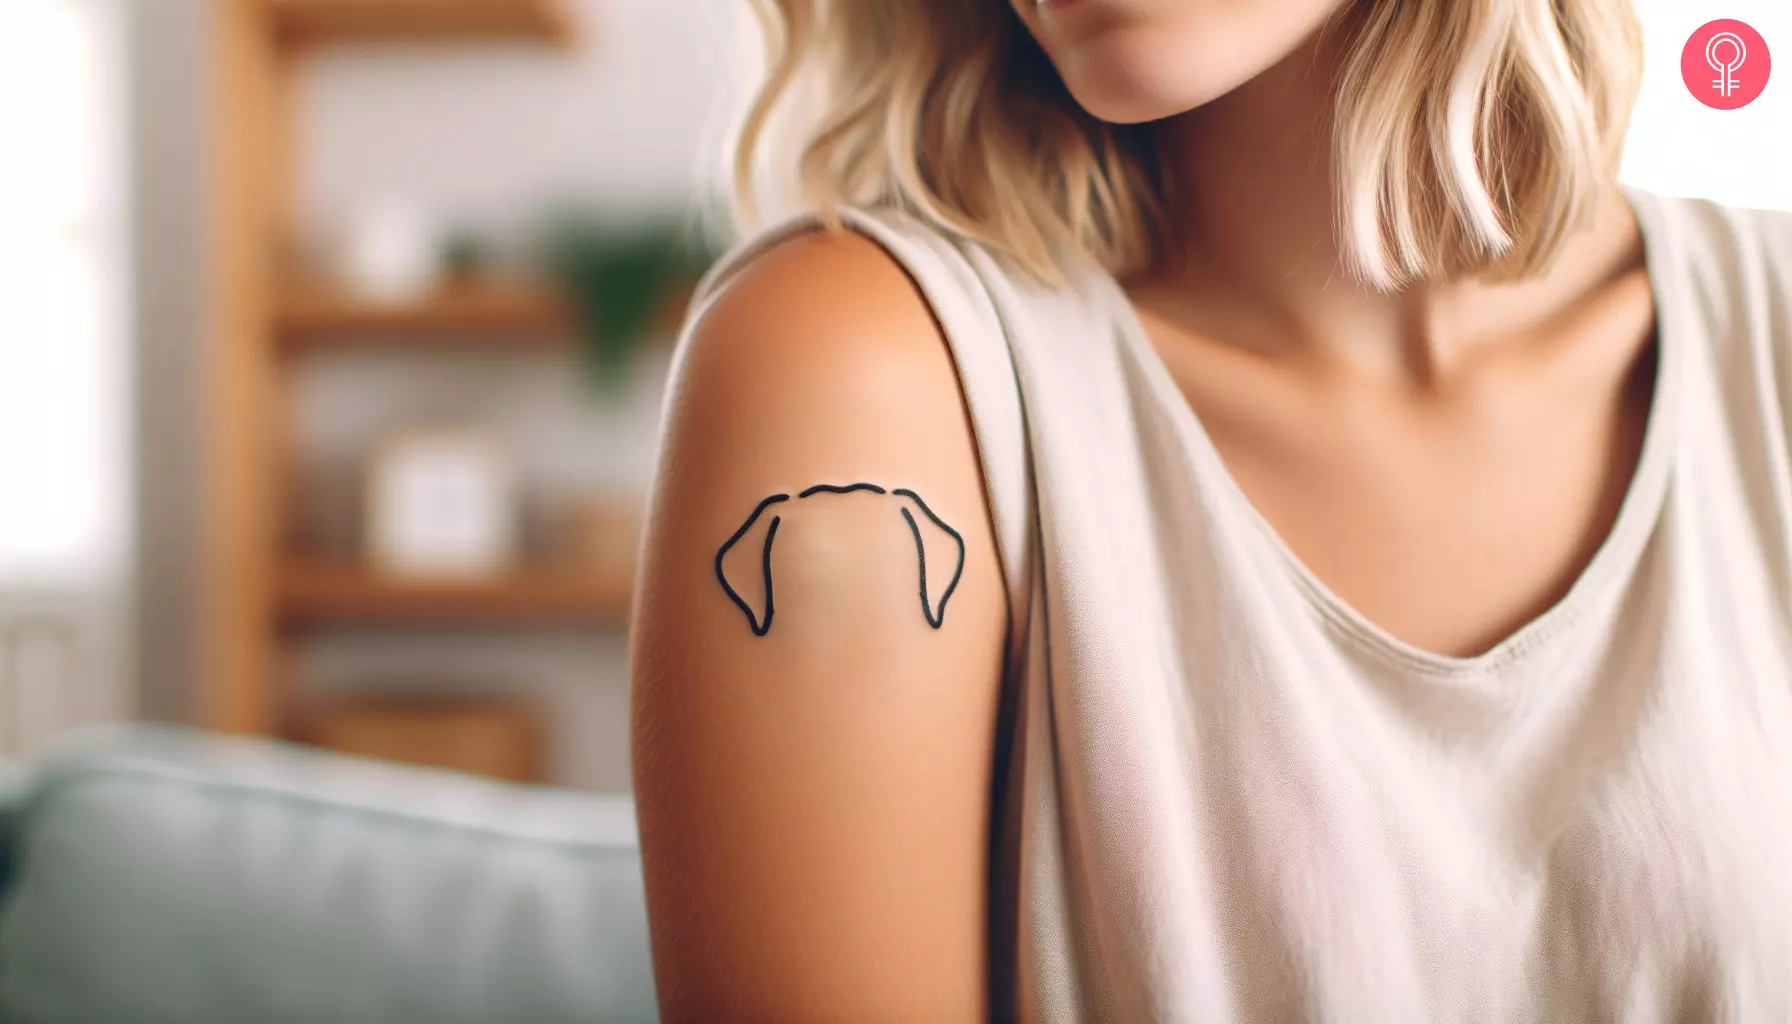 Woman showing off her Labrador ears tattoo on the upper arm